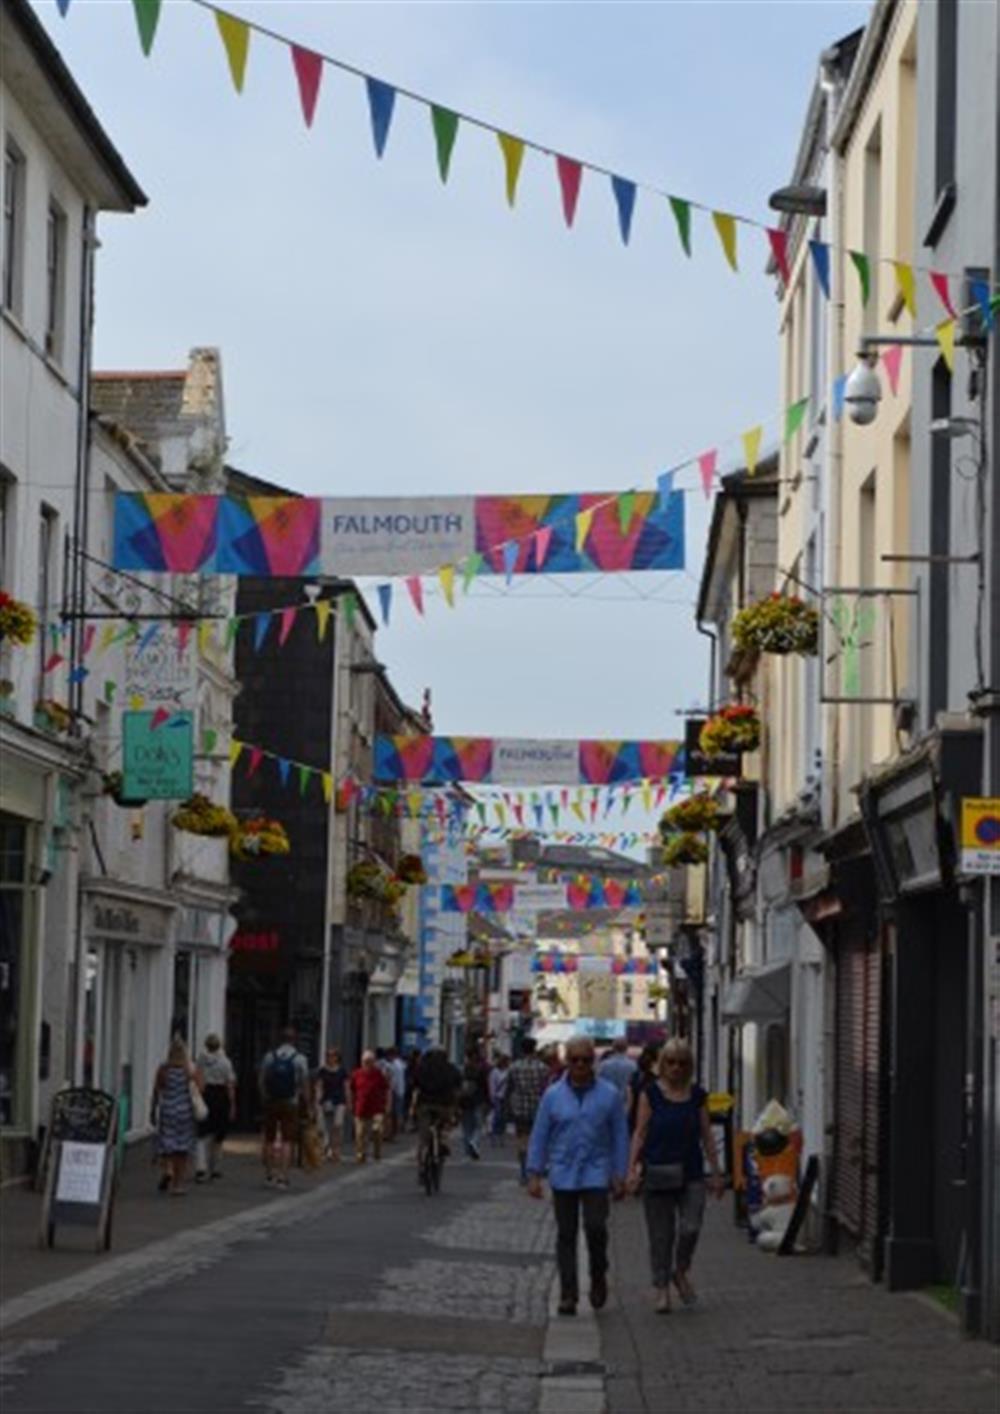 Falmouth town has an array of shops, plus a range of restaurants, cafes and art galleries at Birch Cottage in Falmouth